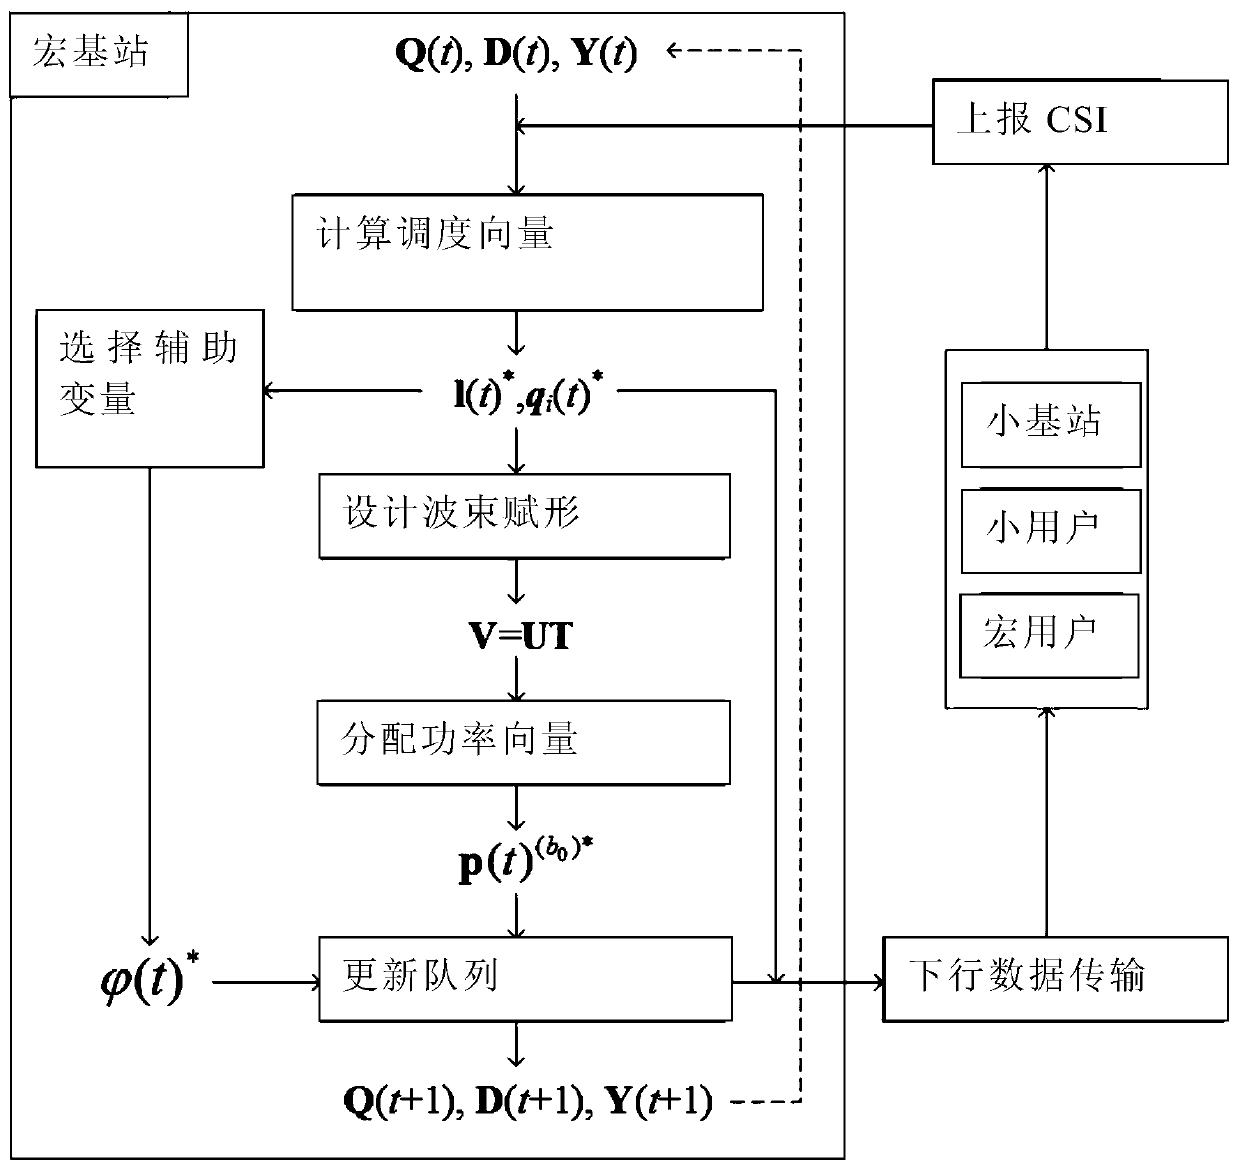 Joint user scheduling method and power distribution method based on large-scale MIMO